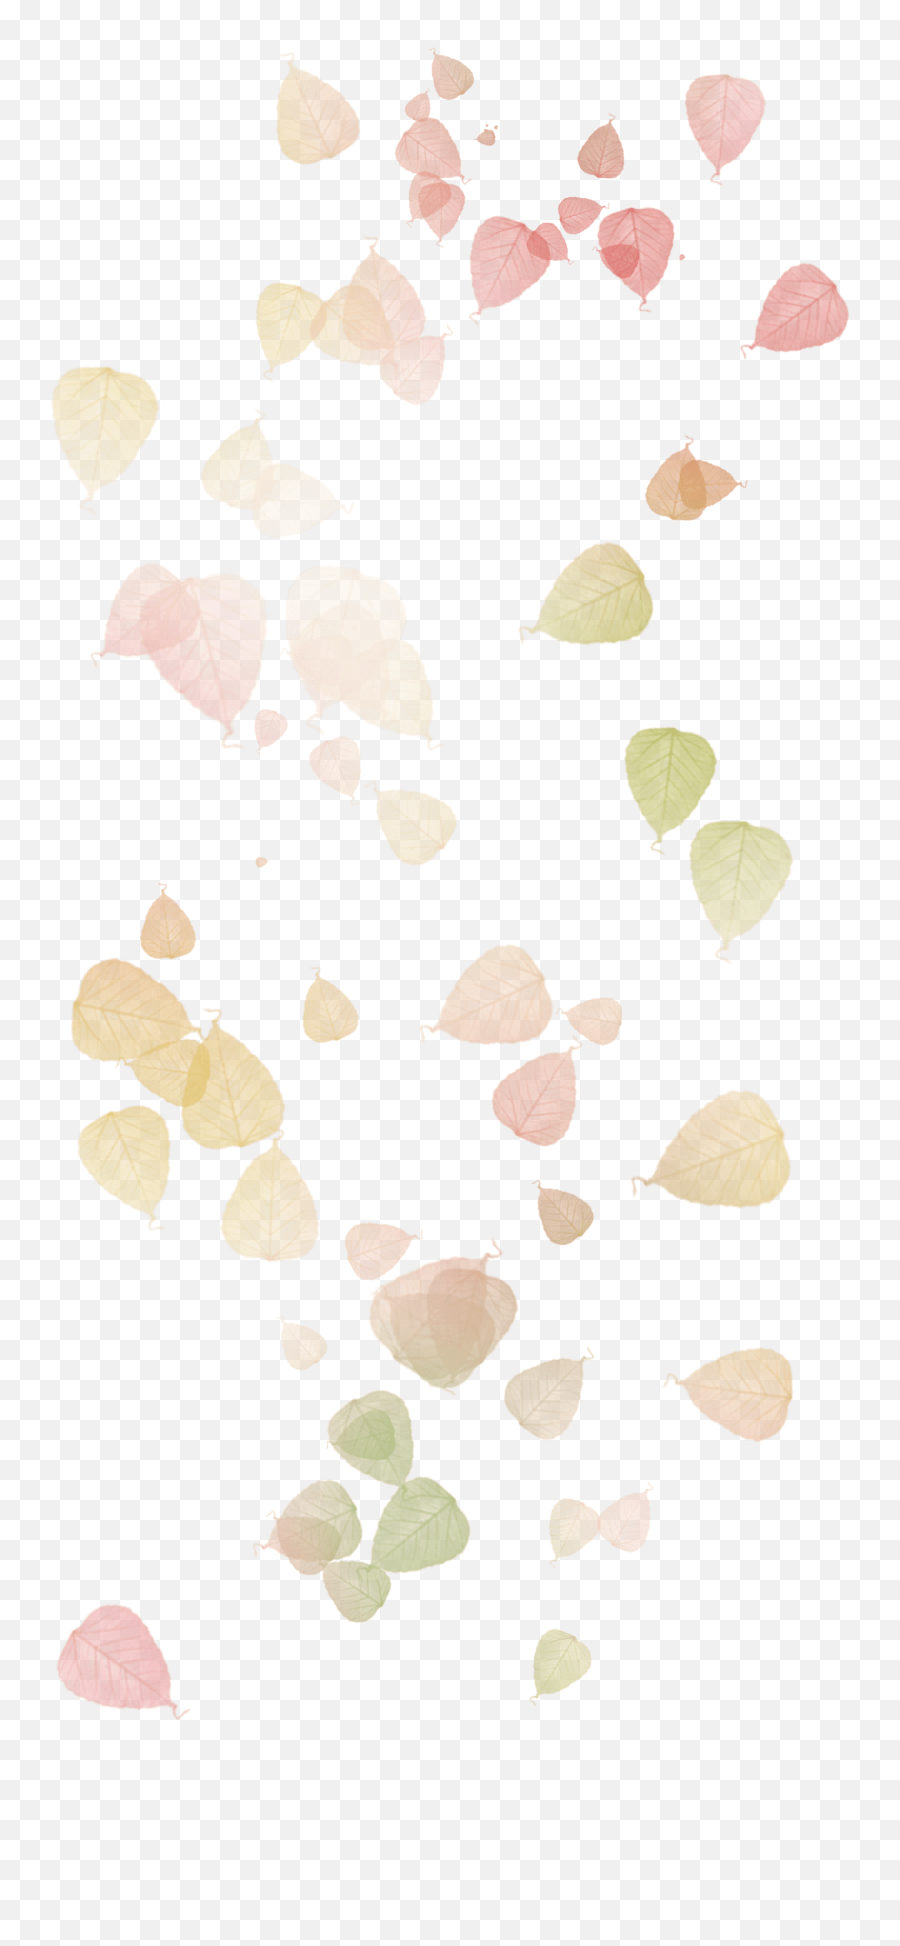 Autumn Leaves Leaf Watercolor Painting Watercolor Leaves - Watercolor Painting Emoji,Autumn Leaf Emoji